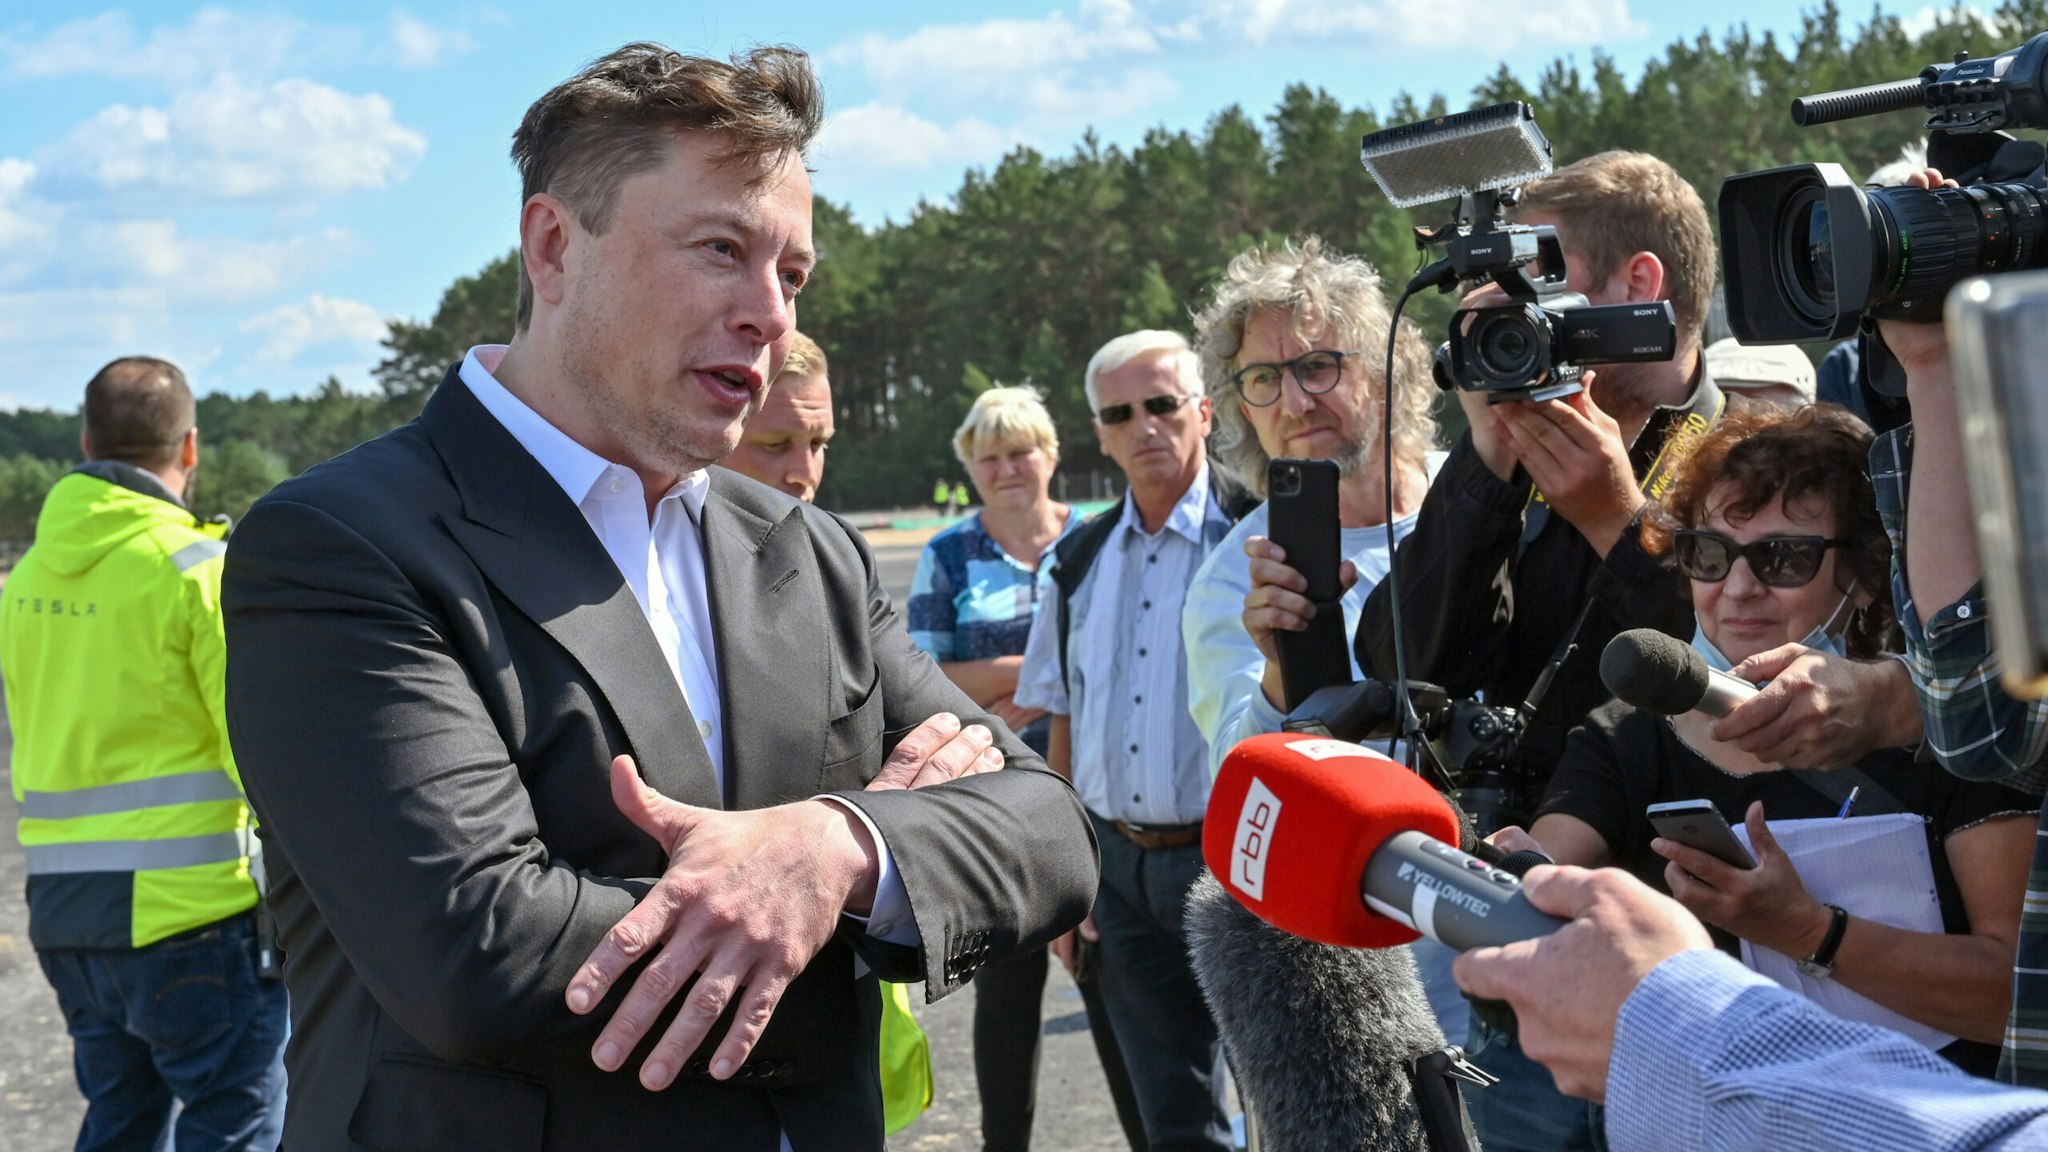 03 September 2020, Brandenburg, Grünheide: Elon Musk, head of Tesla, stands on the construction site of the Tesla Giga-Factory and talks to journalists. In Grünheide near Berlin, a maximum of 500,000 vehicles per year are to roll off the assembly line from July 2021 - and according to the car manufacturer's plans, the maximum is to be reached as quickly as possible.